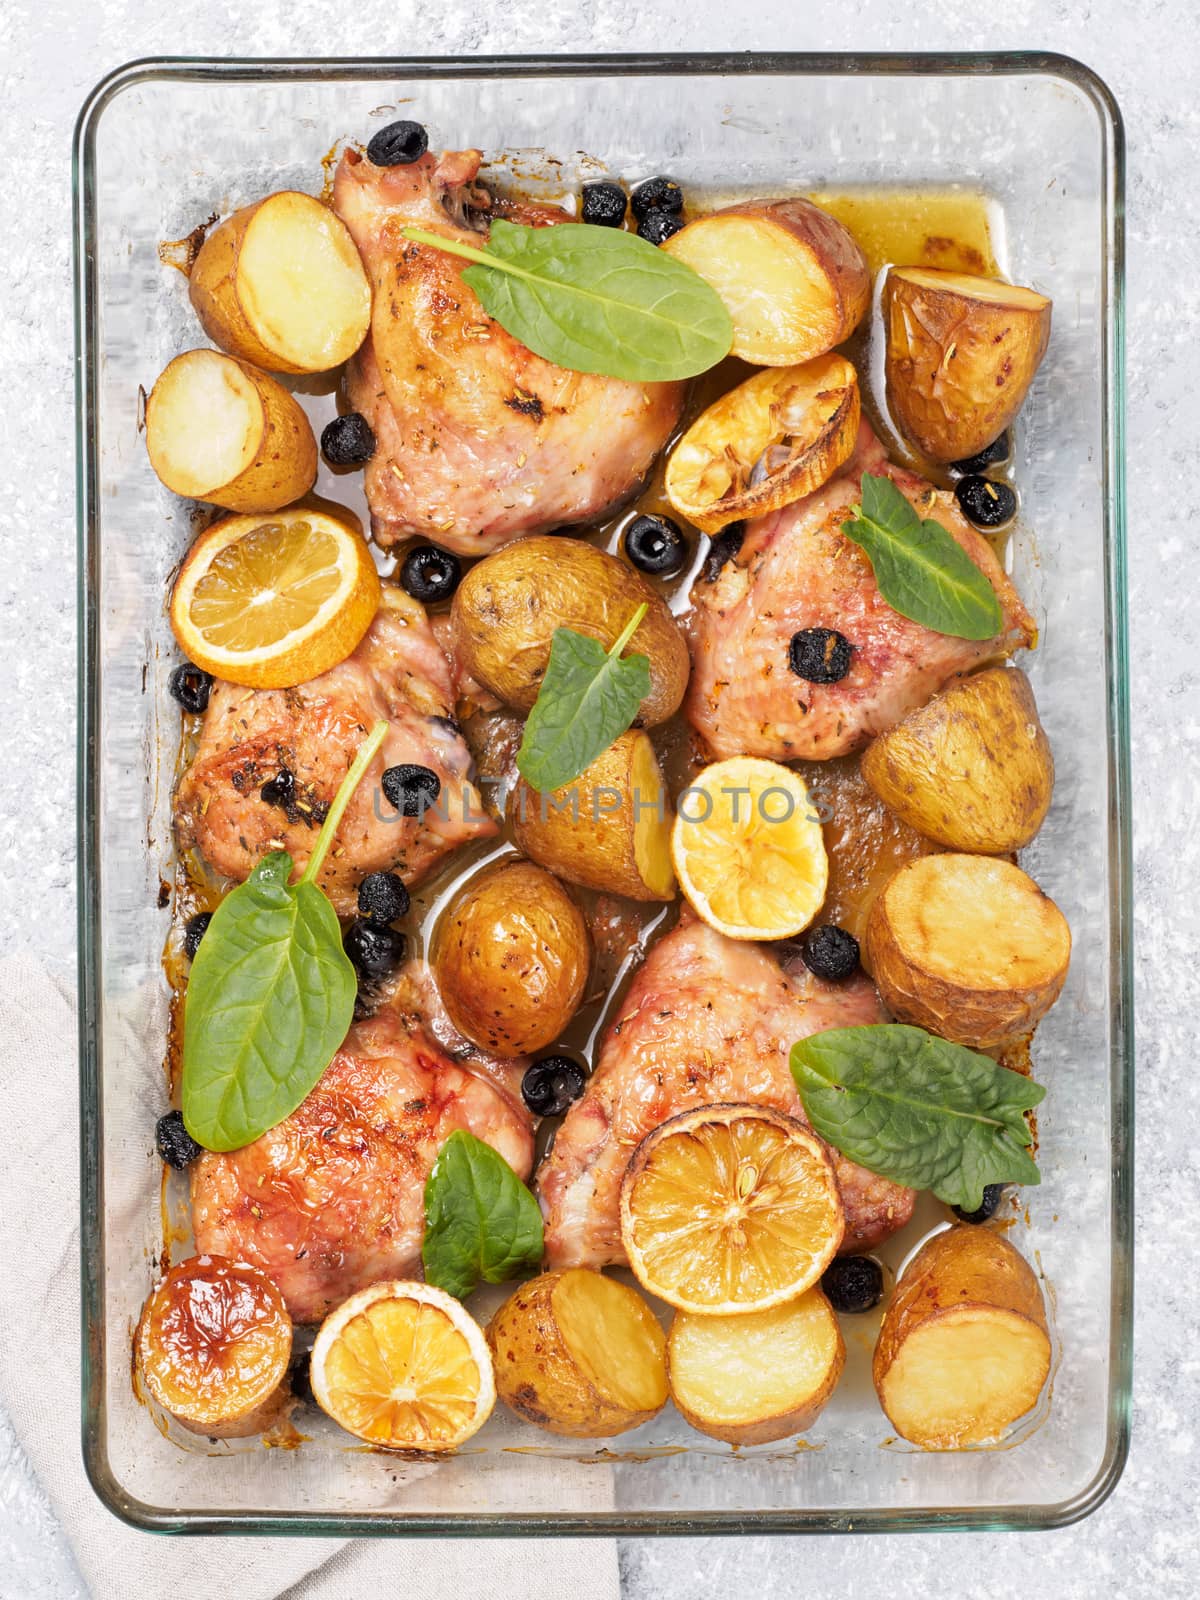 Baked chicken leg quarter with potatoes and lemon by fascinadora